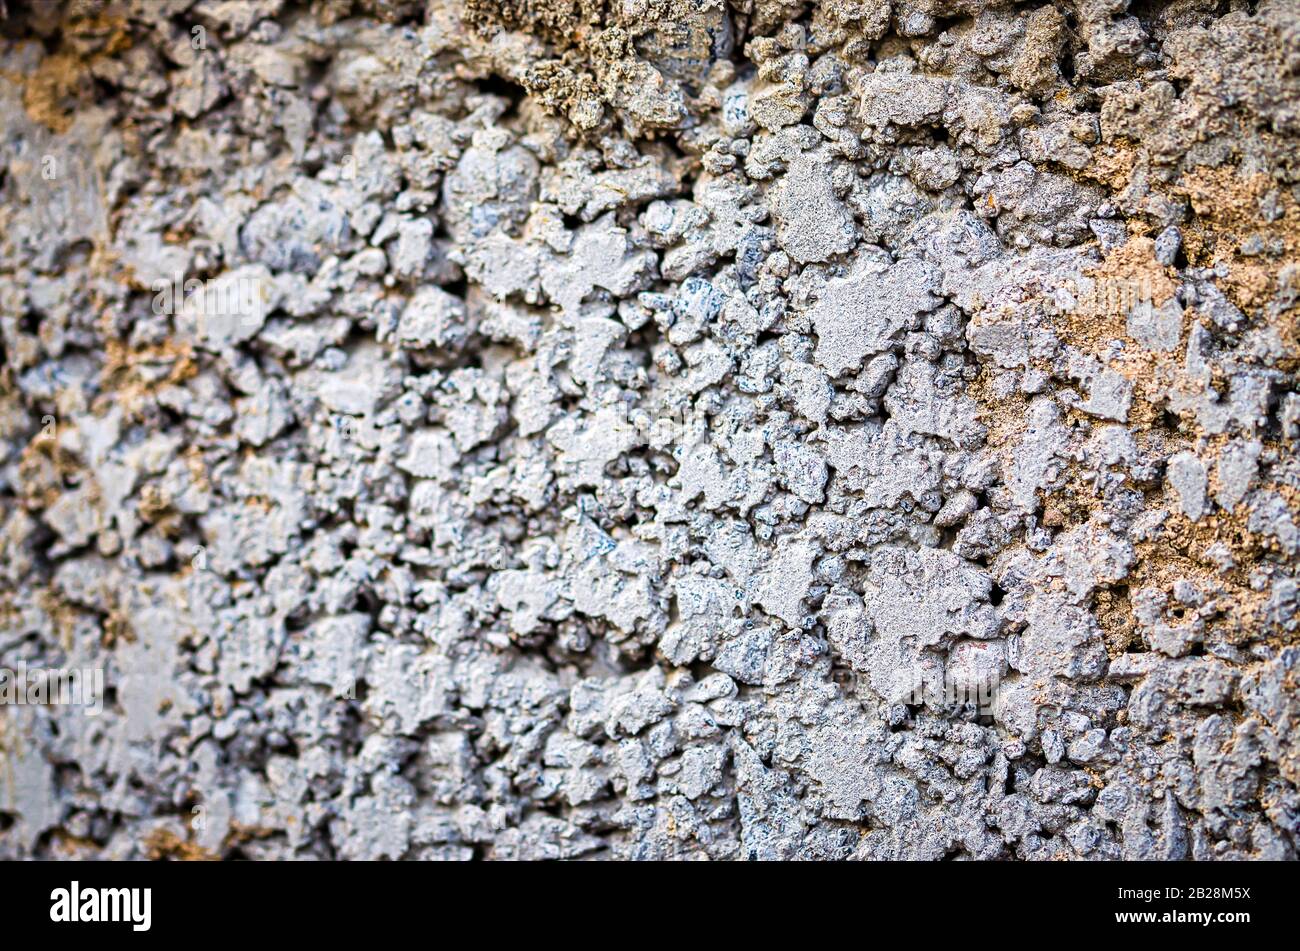 Crude Concrete Grunge Background with varying focus. Stock Photo